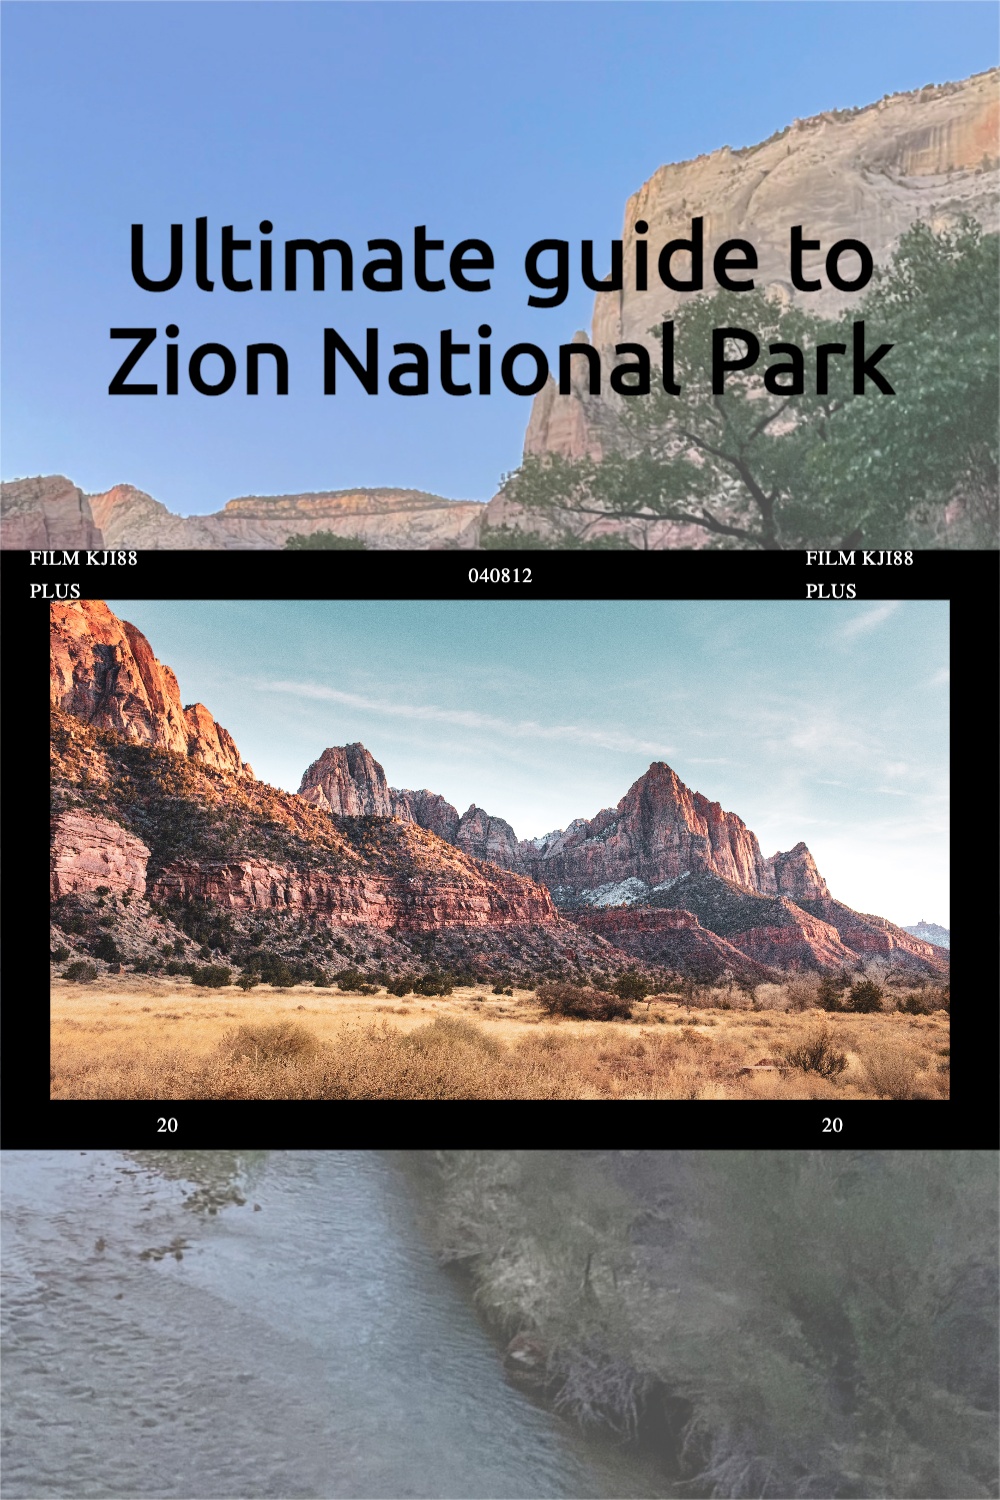 Ultimate guide to planning your trip to Zion Park. #utah #zion 